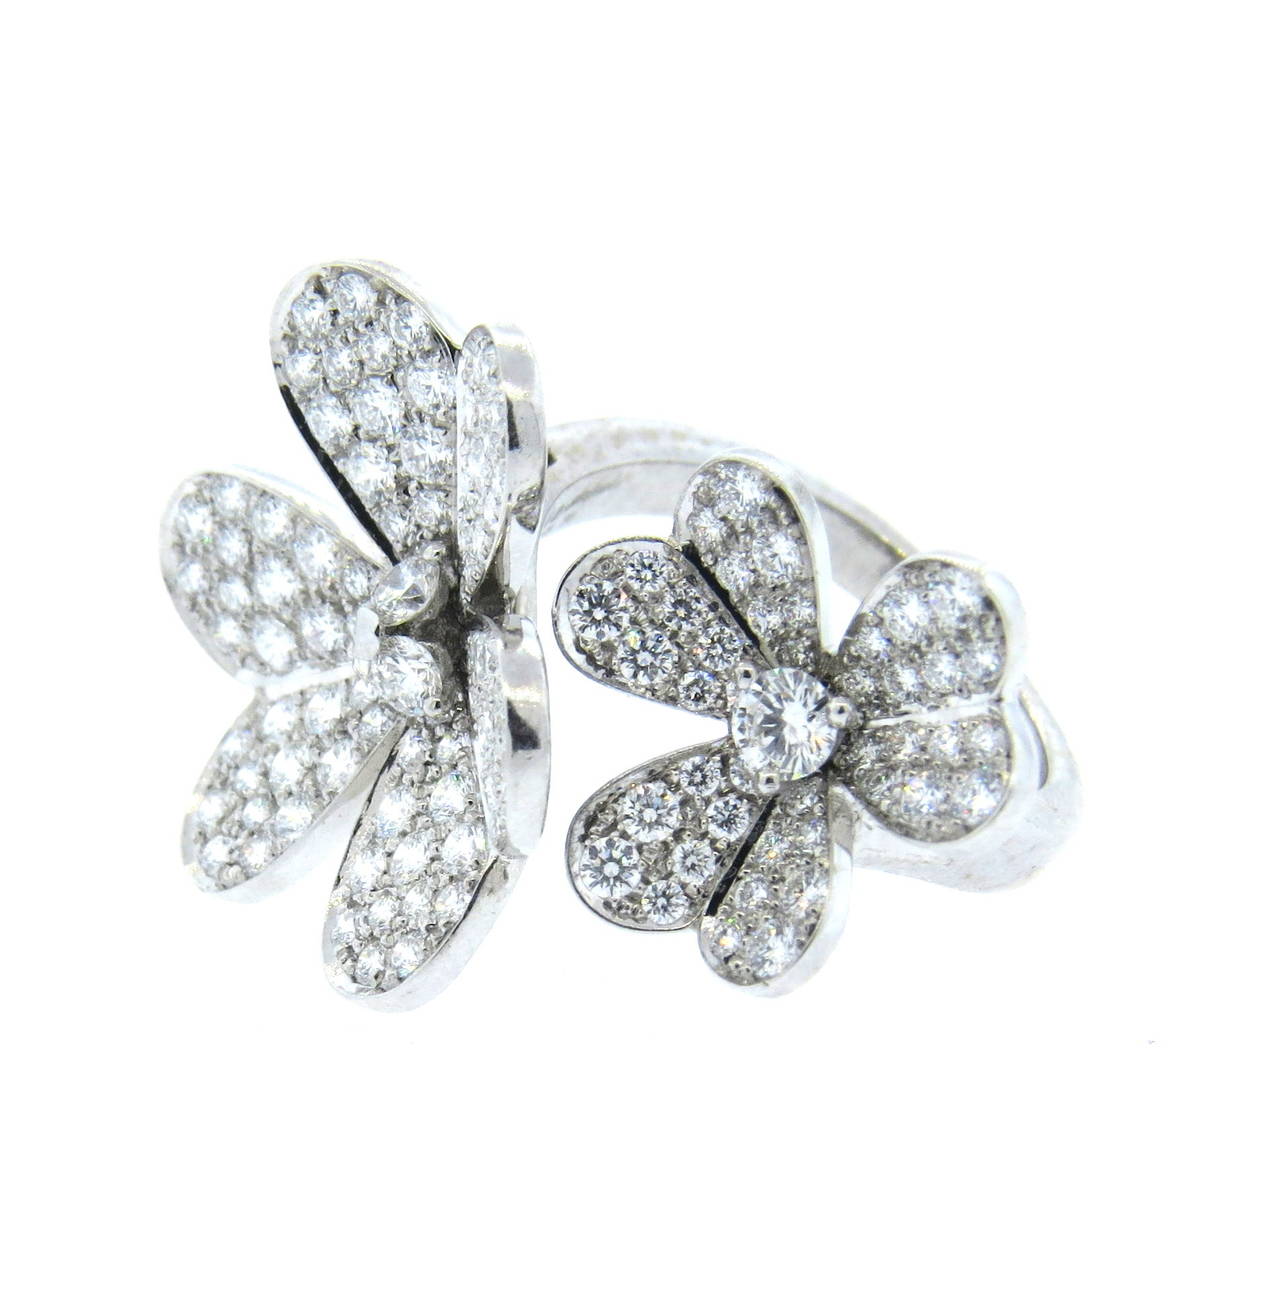 Beautiful Van Cleef & Arpels 18k white gold flower ring from Frivole collection, featuring approximately 2.25ctw in diamonds. Ring size 6, ring top is 20mm x 32mm. Marked Van Cleef & Arpels,750,BL66373,50. Weight of the piece - 8.9gr  Currently